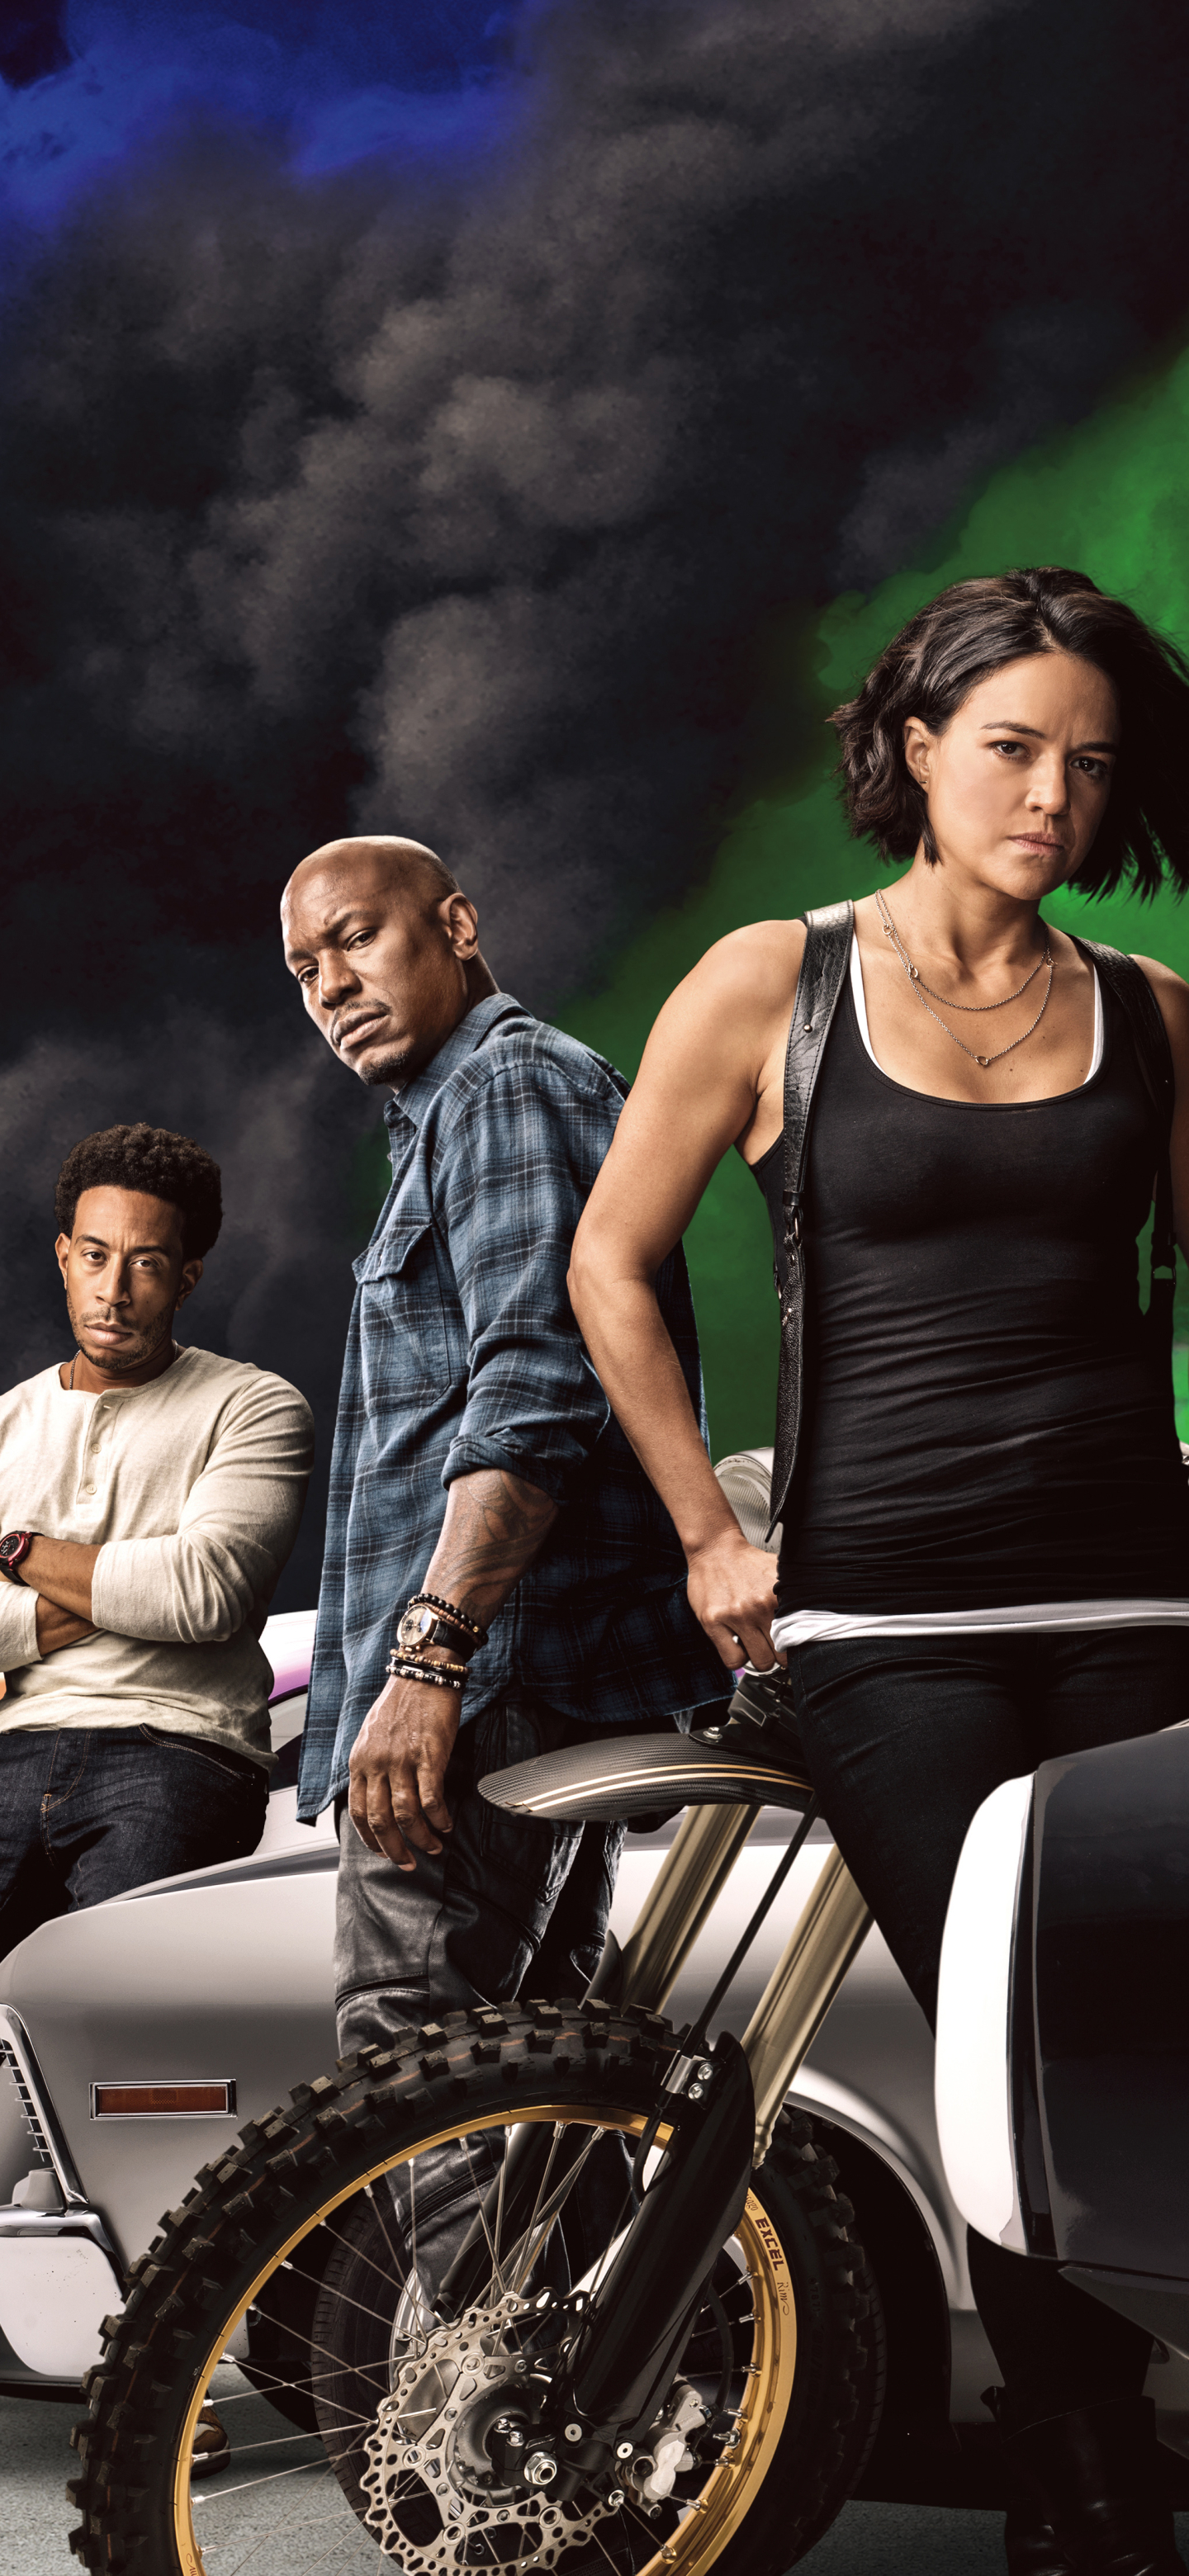 Free download wallpaper Fast & Furious, Movie, Tyrese Gibson, Ludacris, Roman Pearce, Tej (Fast & Furious), Michelle Rodriguez, Letty Ortiz, Fast & Furious 9 on your PC desktop